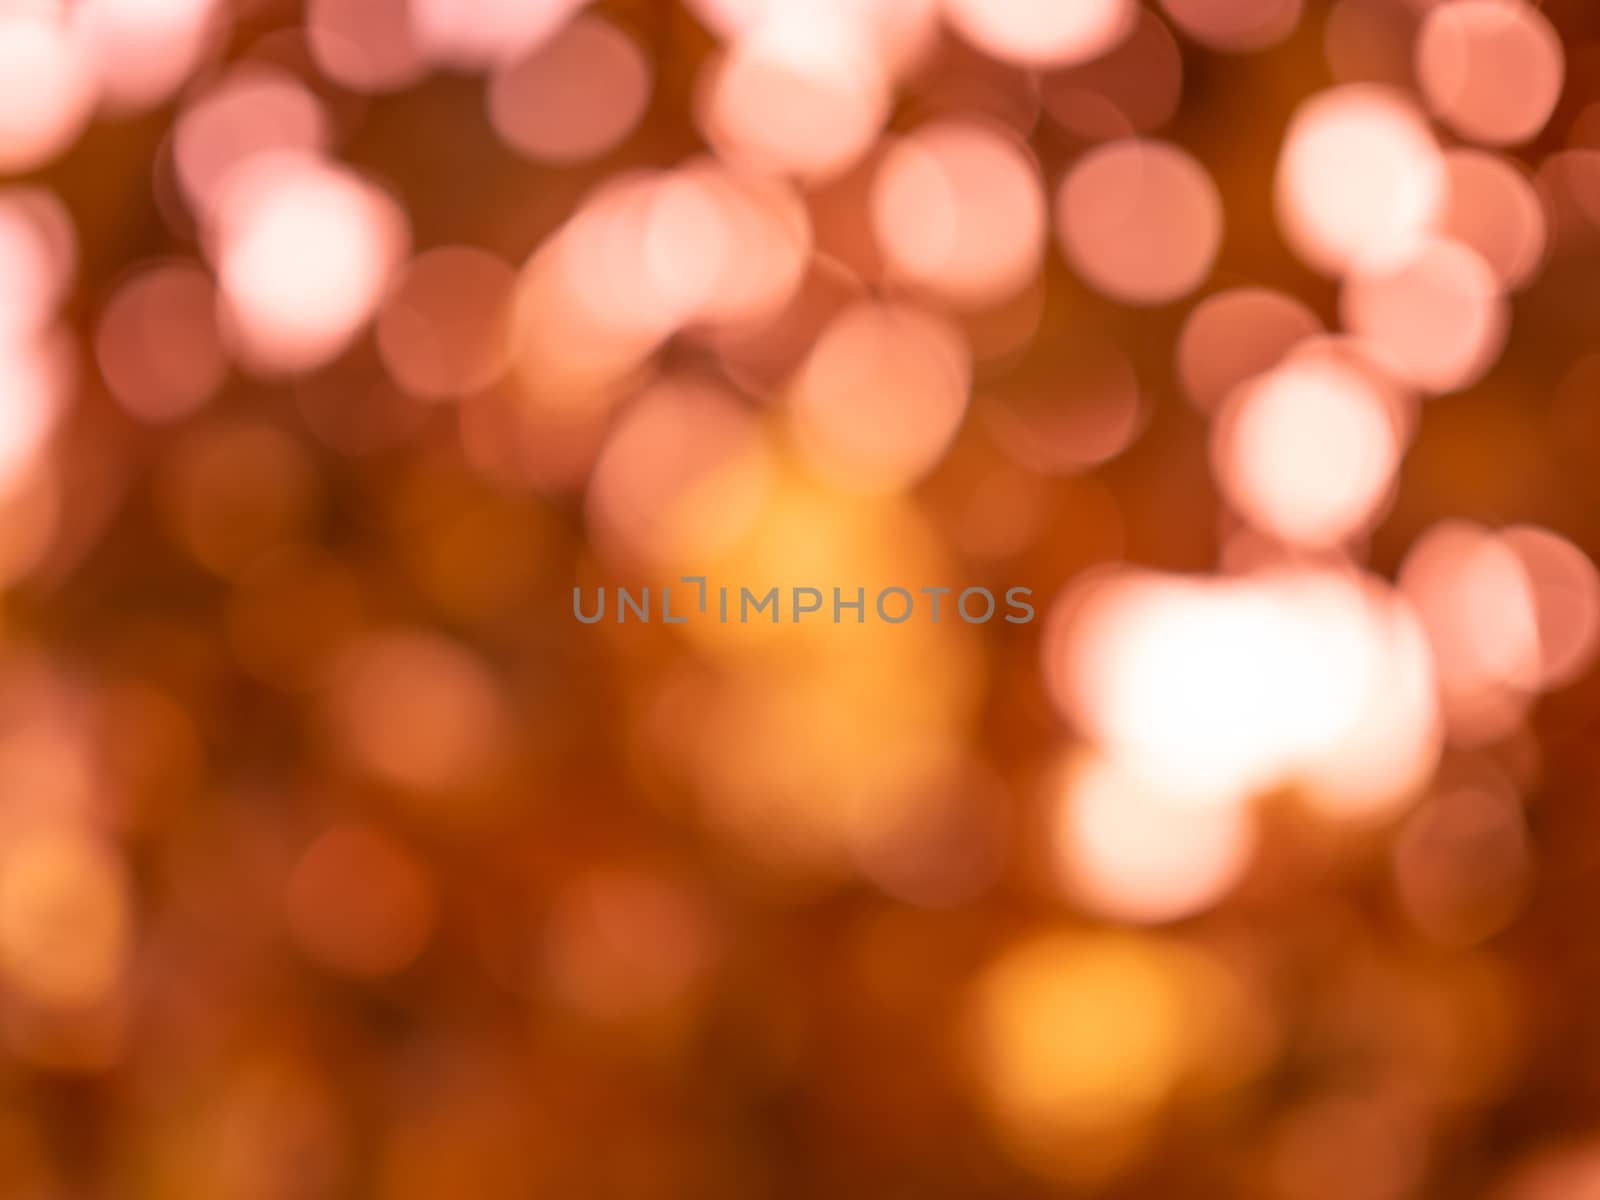 Abstract circle light bokeh background image There are bright yellow and orange light bulbs shining. Abstract background concept.